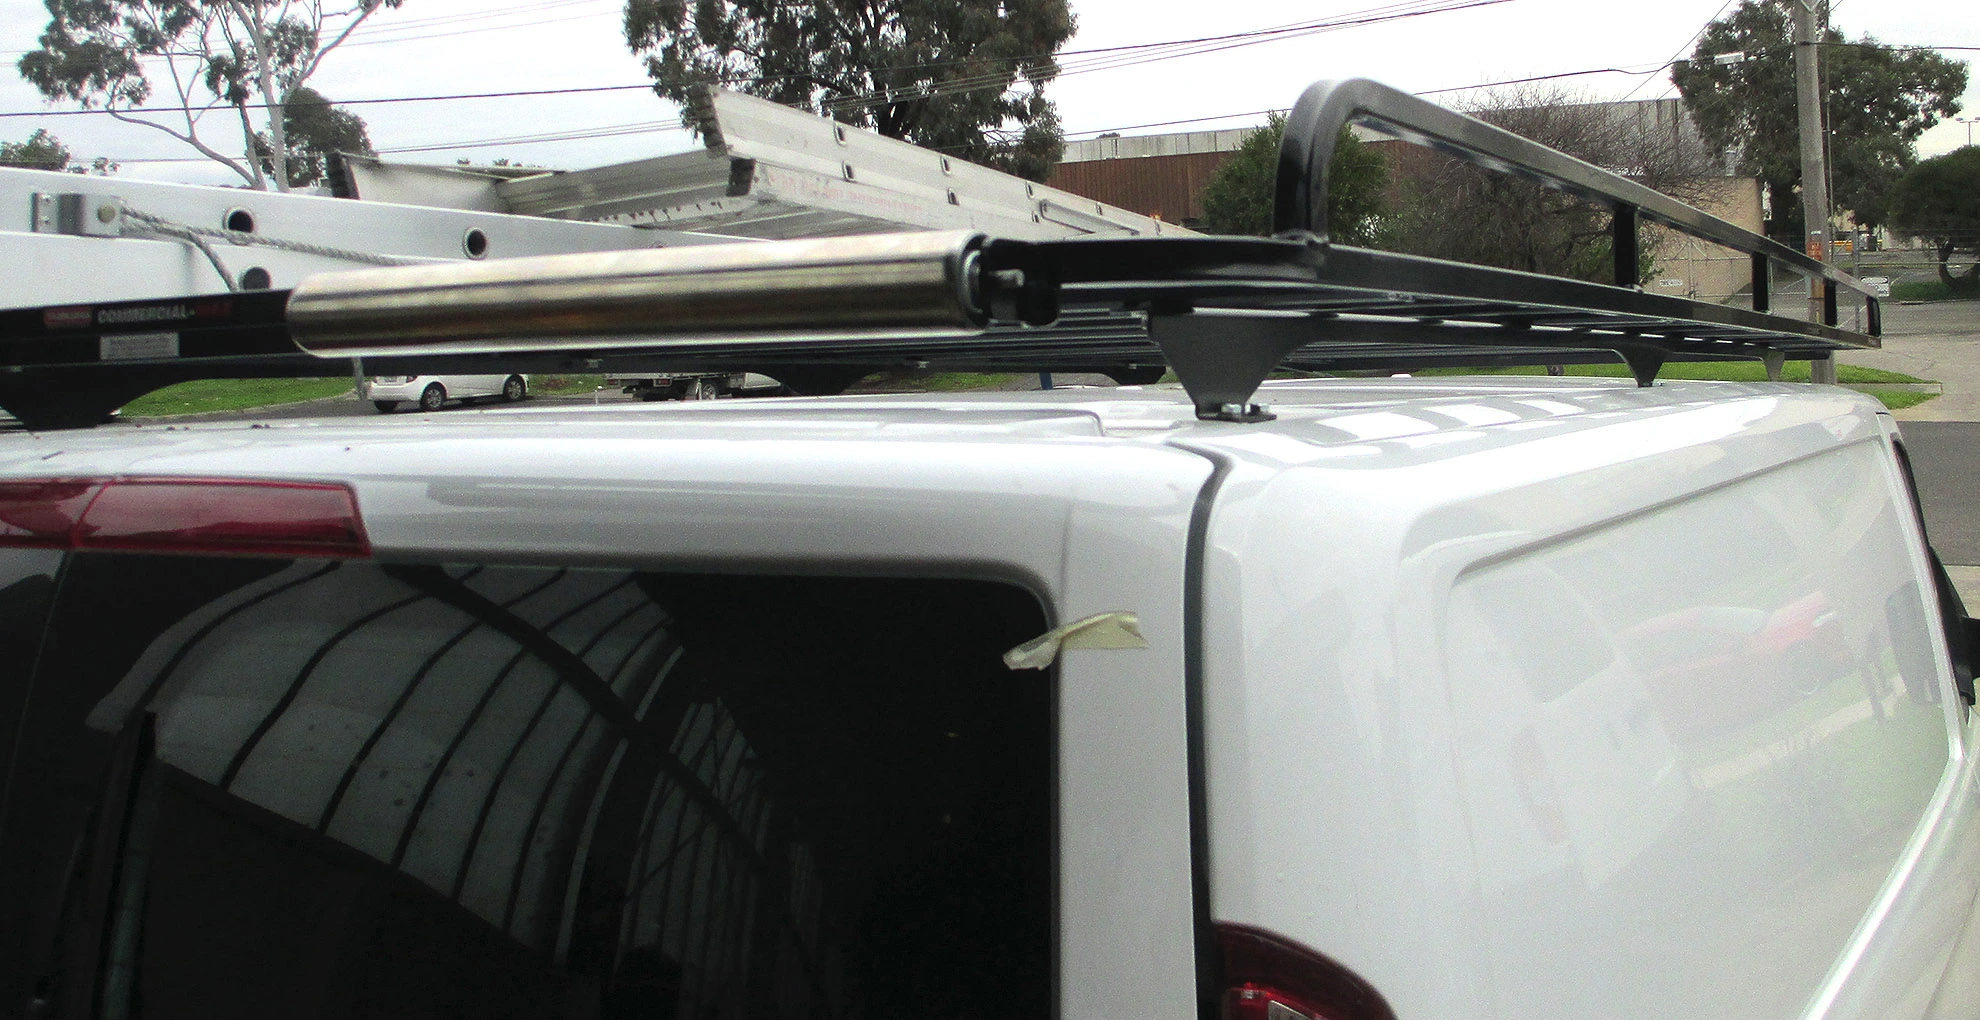 Commercial-Max-roof-rack-with-ladder-rollers